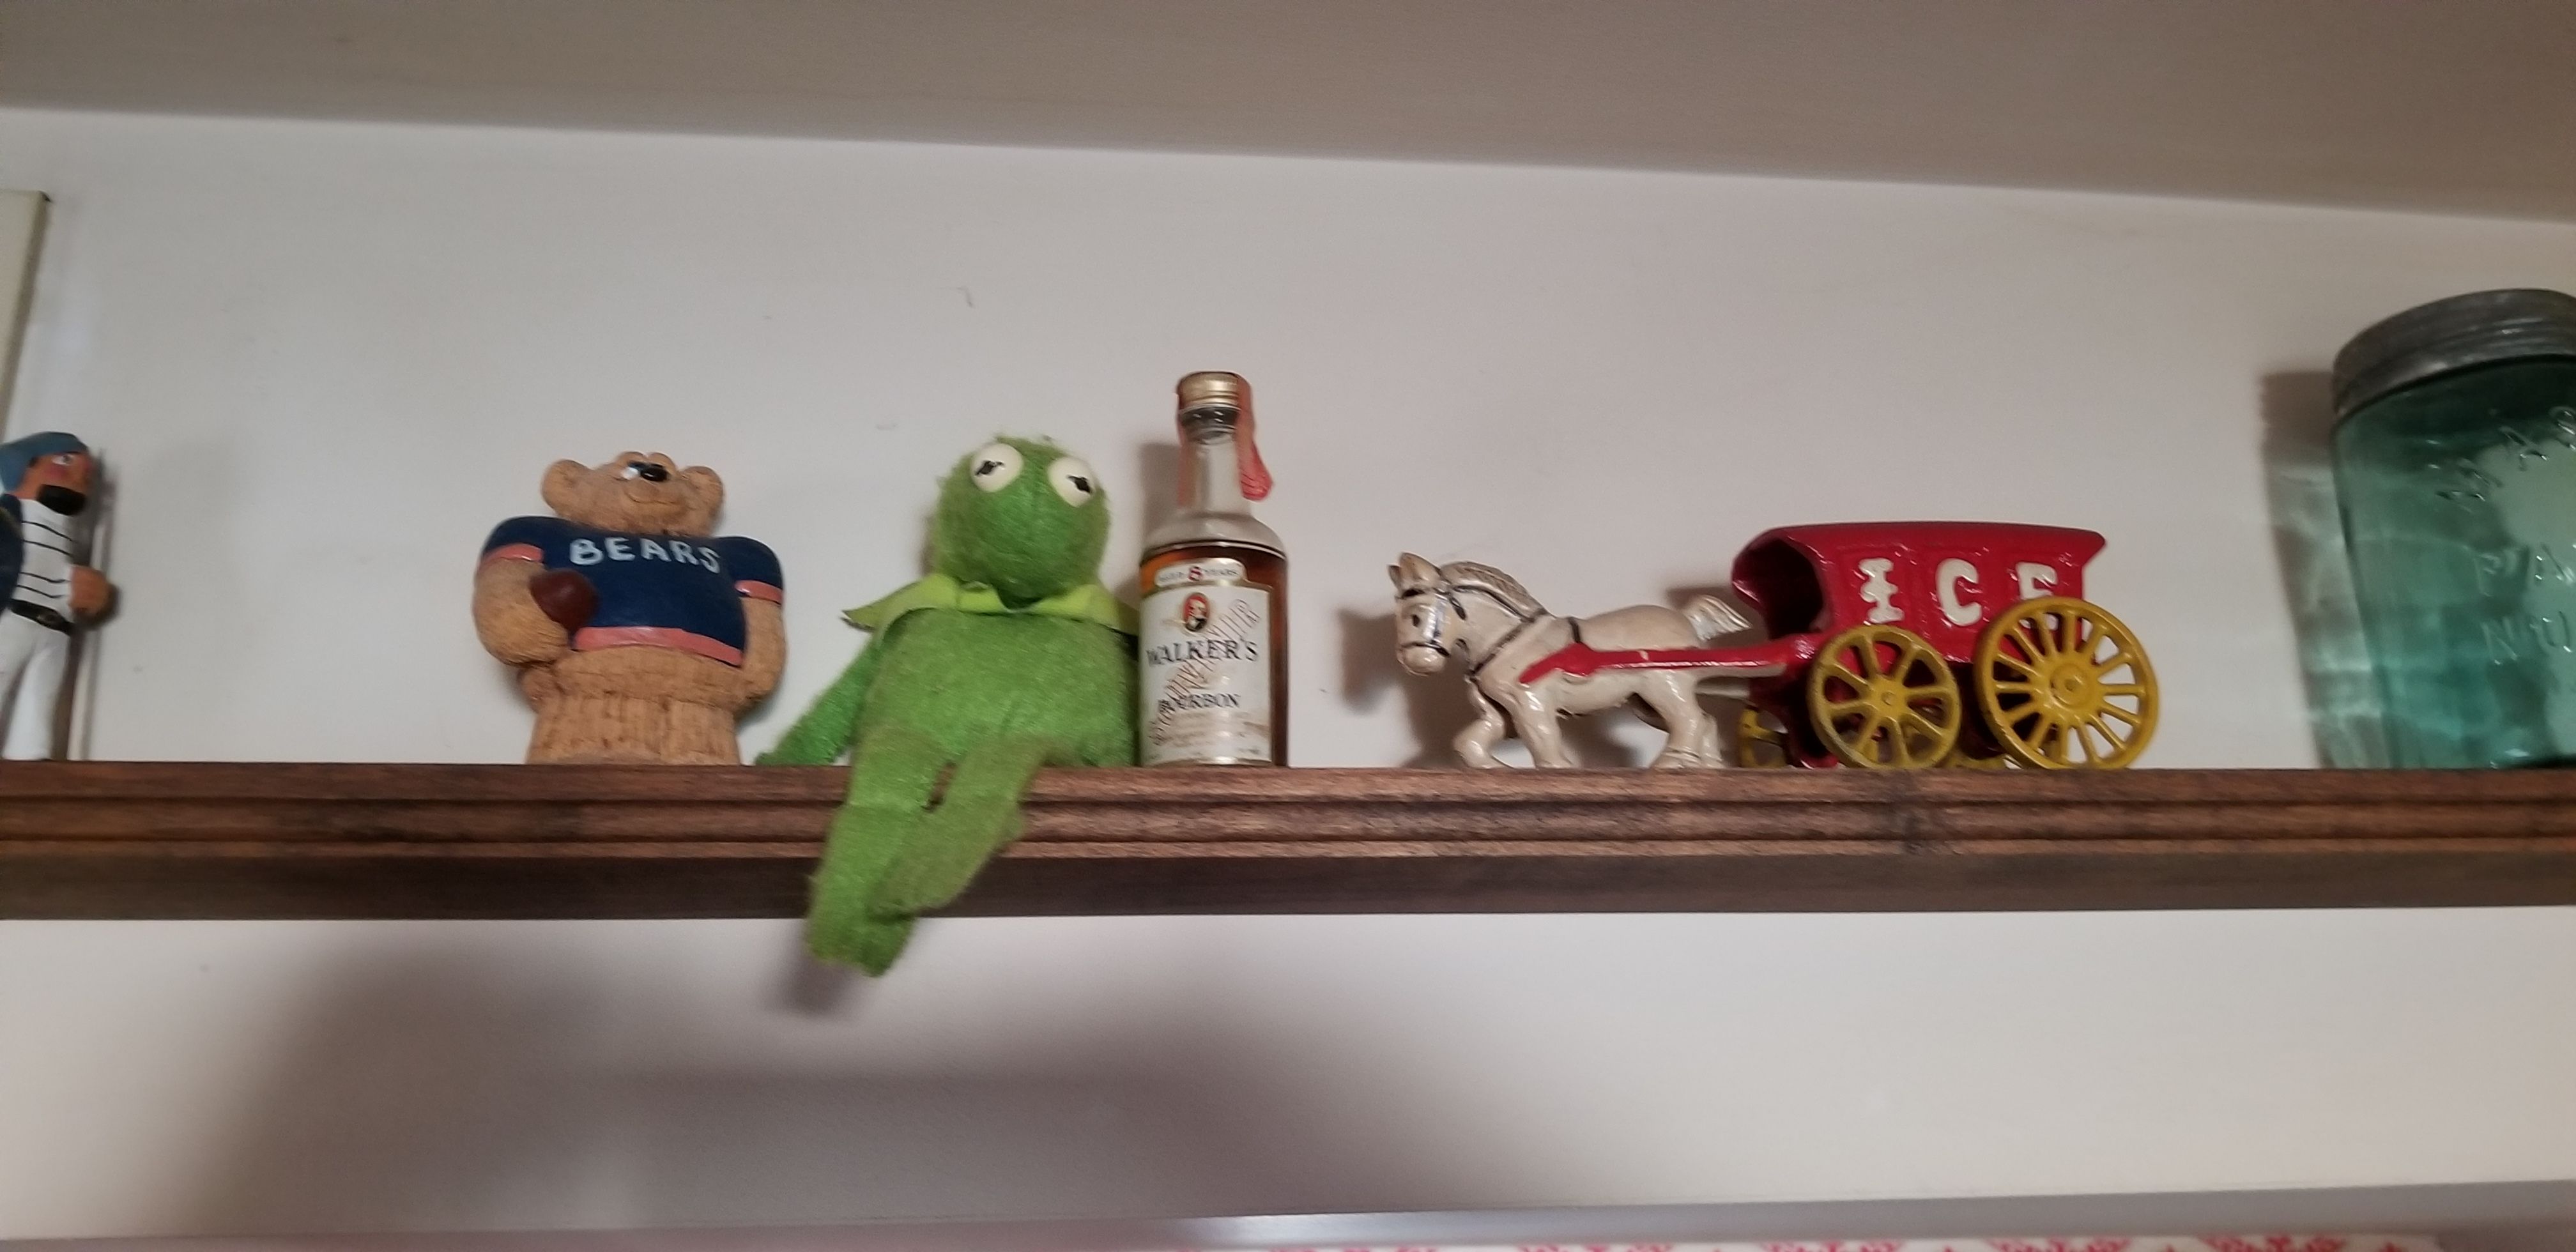 secundario Río Paraná partícipe Vintage Fisher Price Jim Henson 9” Kermit the Frog 864 Beanbag Plush Muppet  Doll for Sale in Rolling Meadows, IL - OfferUp